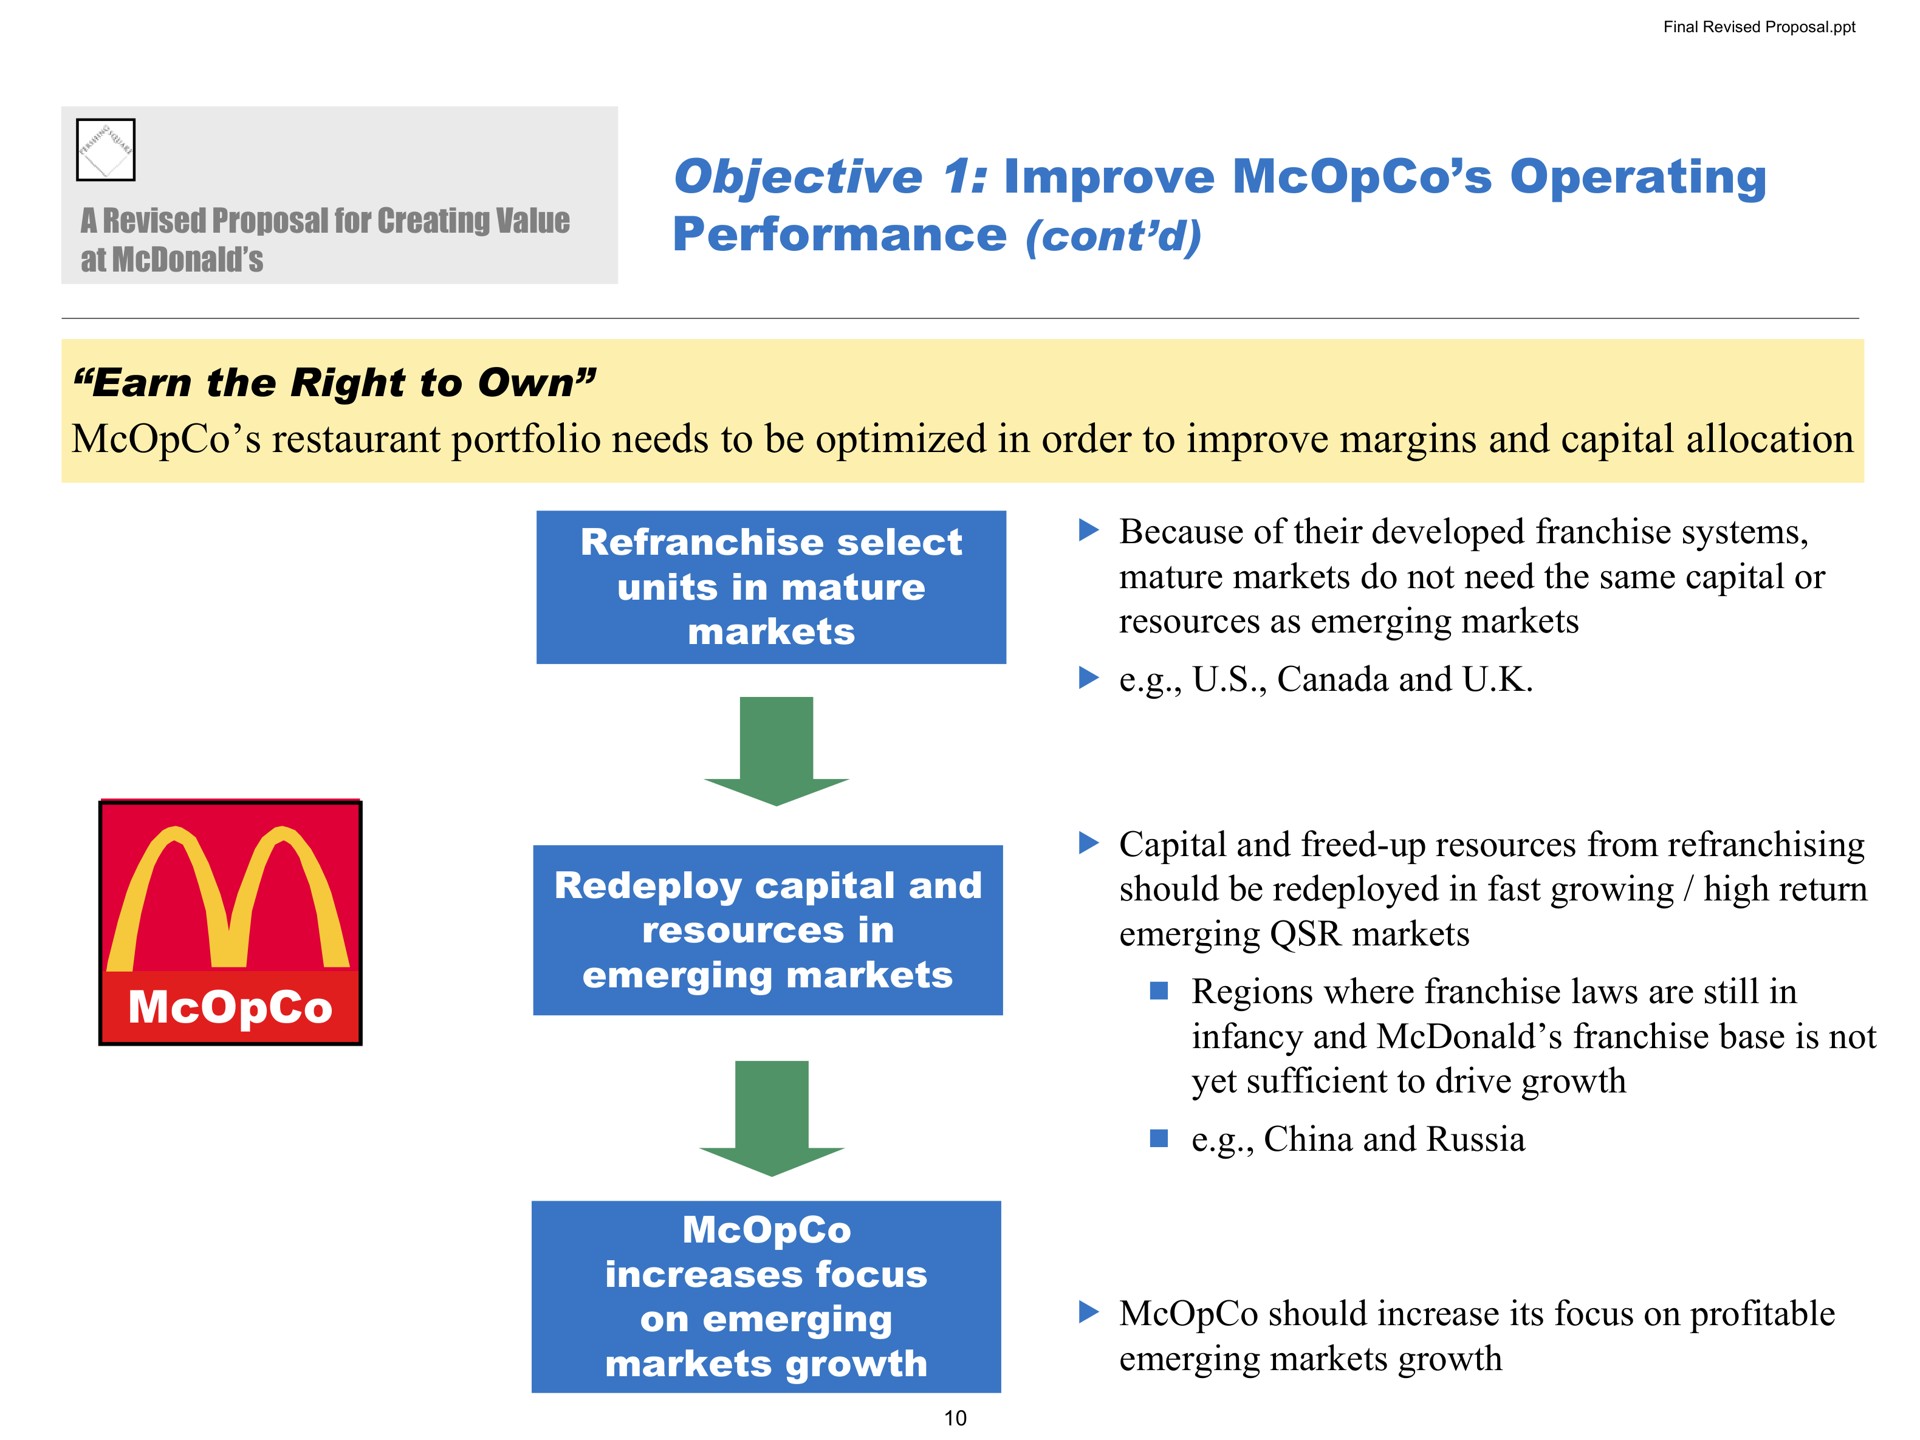 objective improve operating performance earn the right to own restaurant portfolio needs to be optimized in order to improve margins and capital allocation select units in mature markets because of their developed franchise systems mature markets do not need the same capital or resources as emerging markets canada and redeploy capital and resources in emerging markets increases focus on emerging markets growth capital and freed up resources from should be redeployed in fast growing high return emerging markets regions where franchise laws are still in infancy and franchise base is not yet sufficient to drive growth china and russia should increase its focus on profitable emerging markets growth ate eel cit | Pershing Square